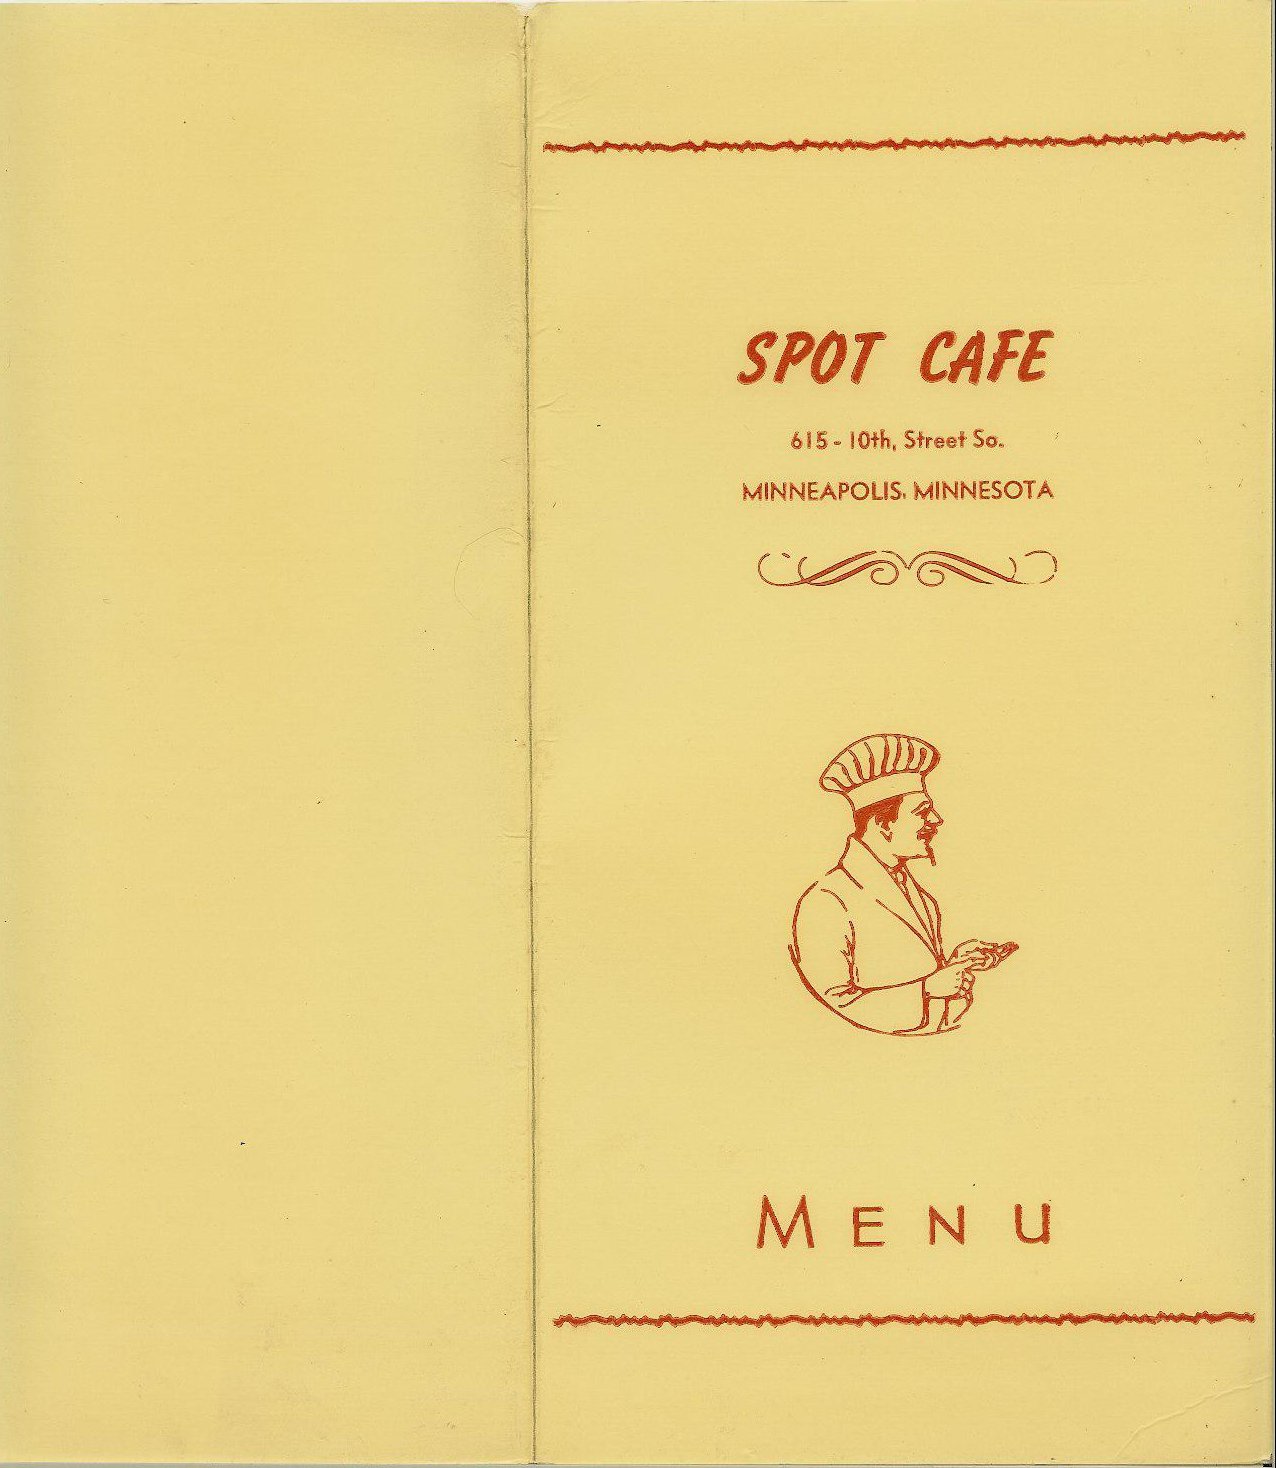 The Spot Café Menu ca. 1950? 615 South 10th Street Minneapolis, Minnesota Shut down because it was a bookie joint downstairs. Original menu recovered from a dumpster.